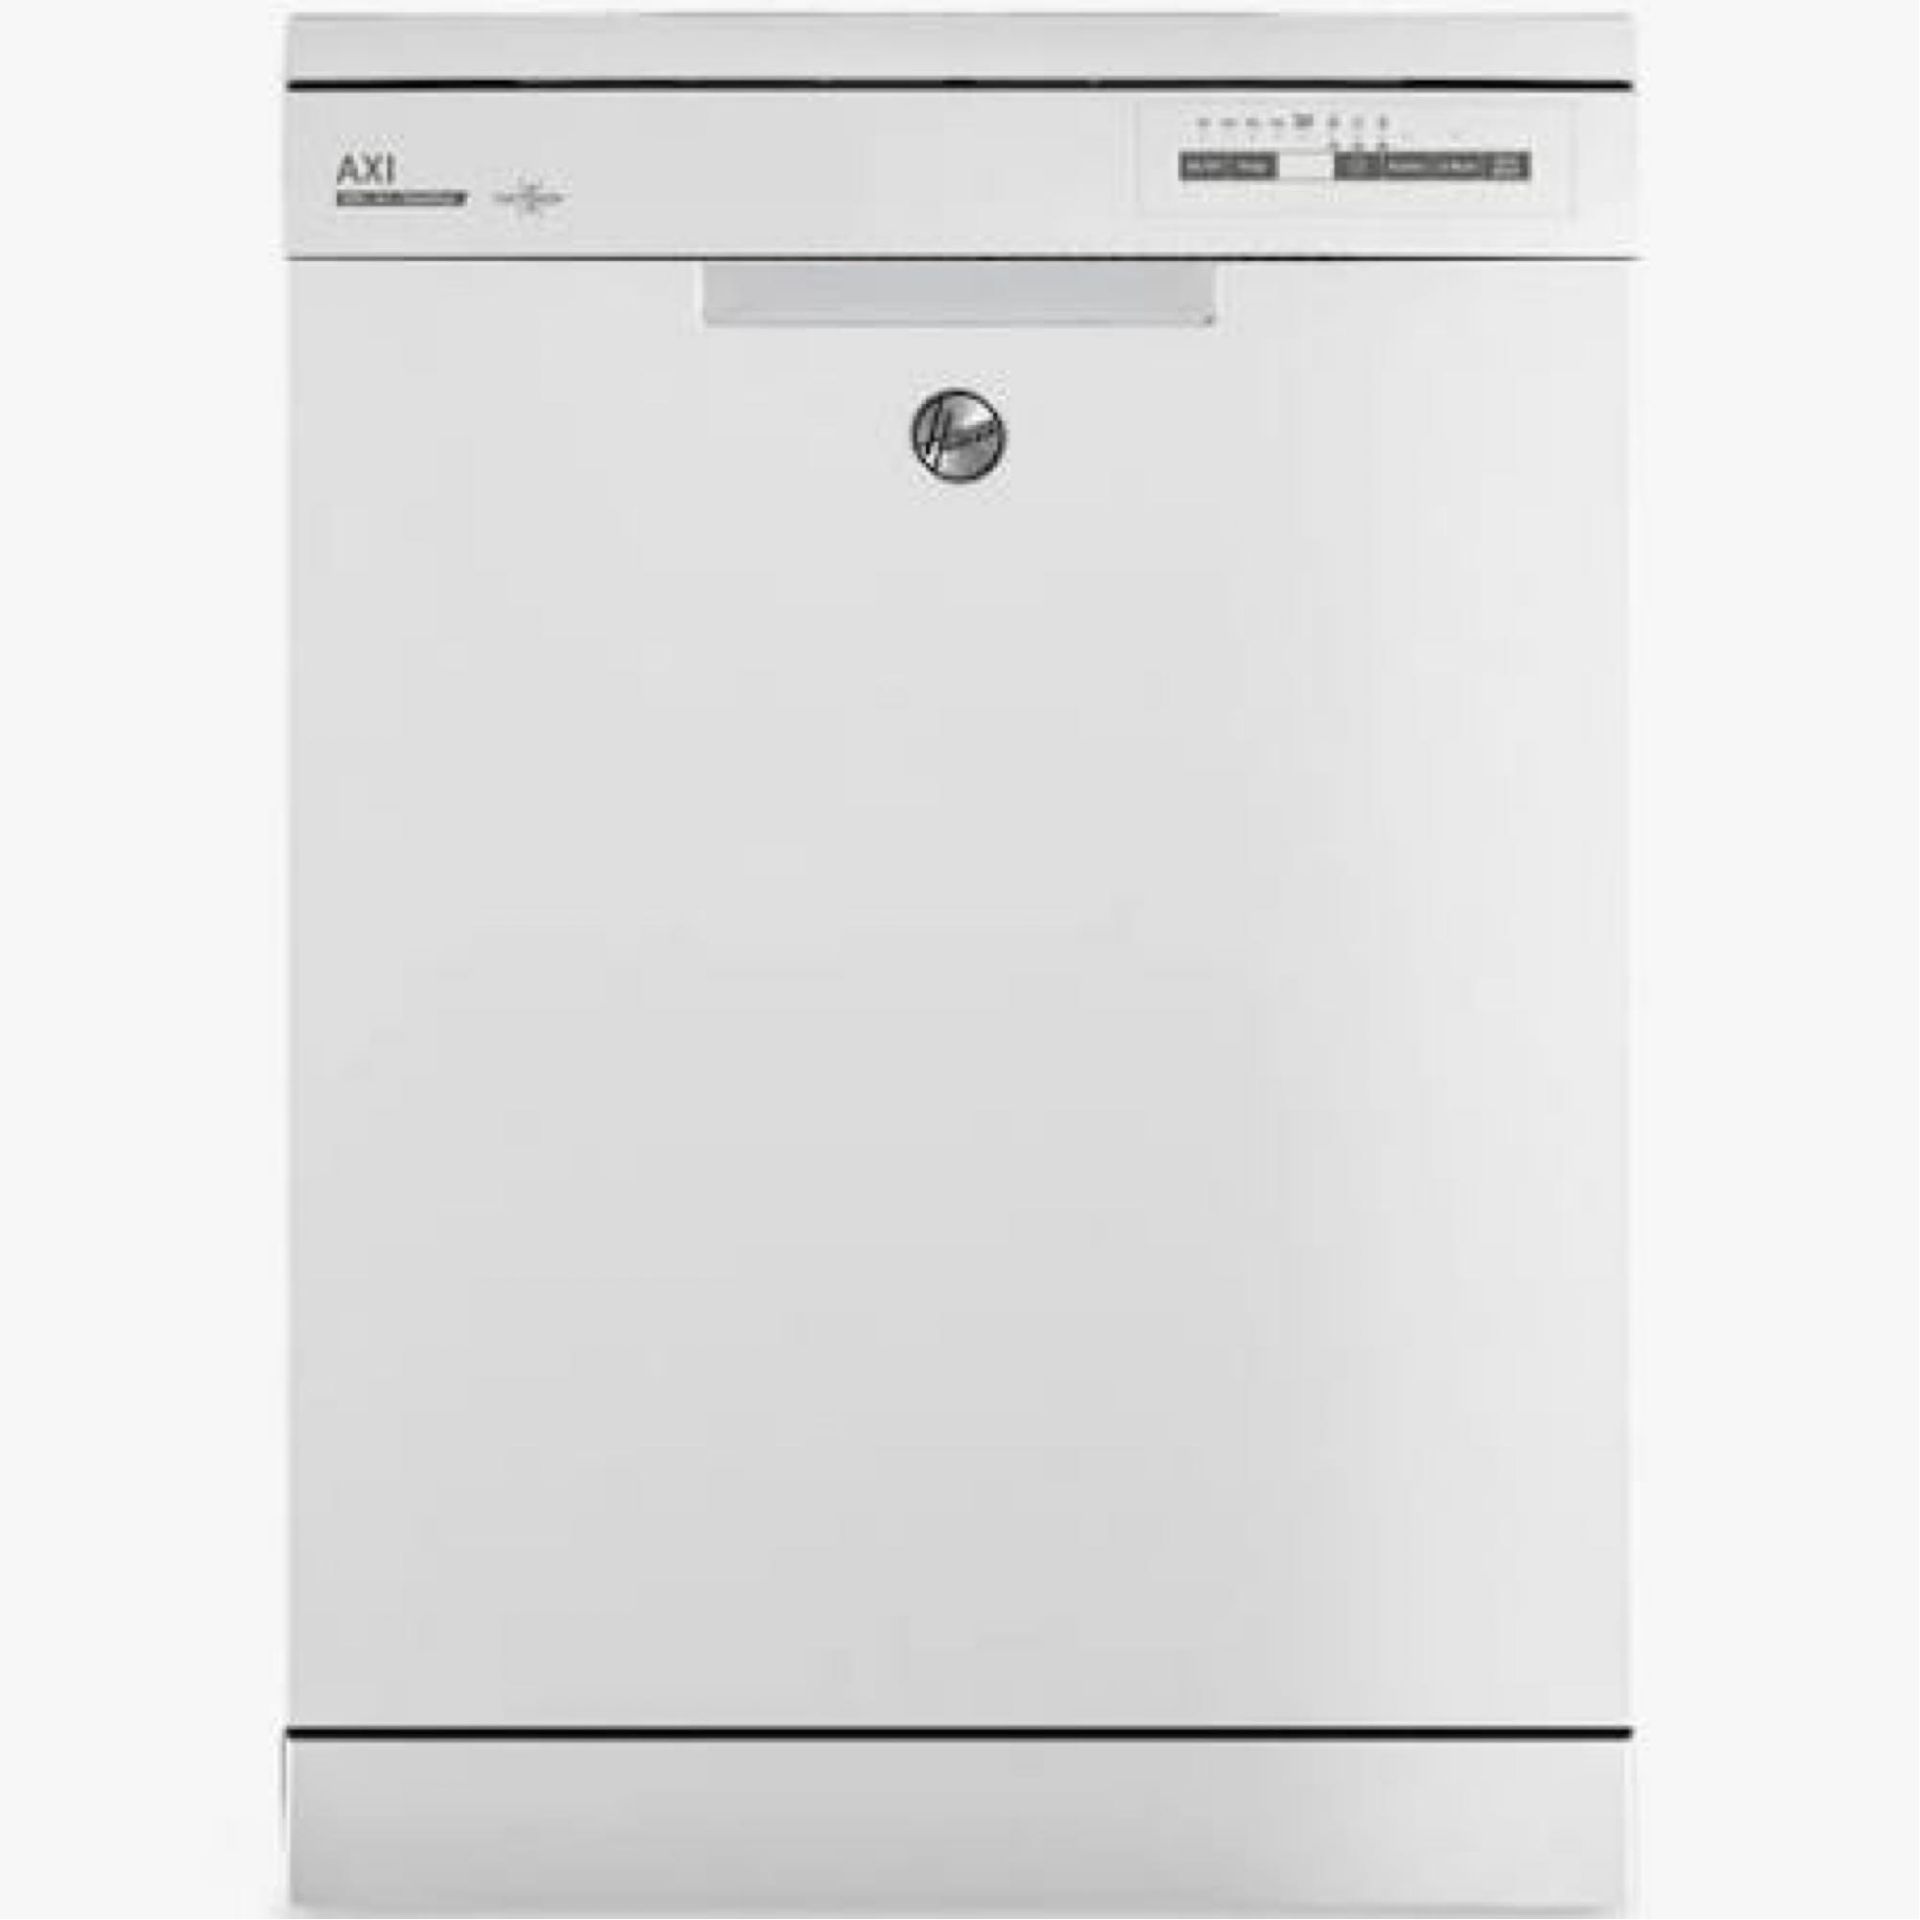 RRP £300 Unboxed Hoover Freestanding Dishwasher - White